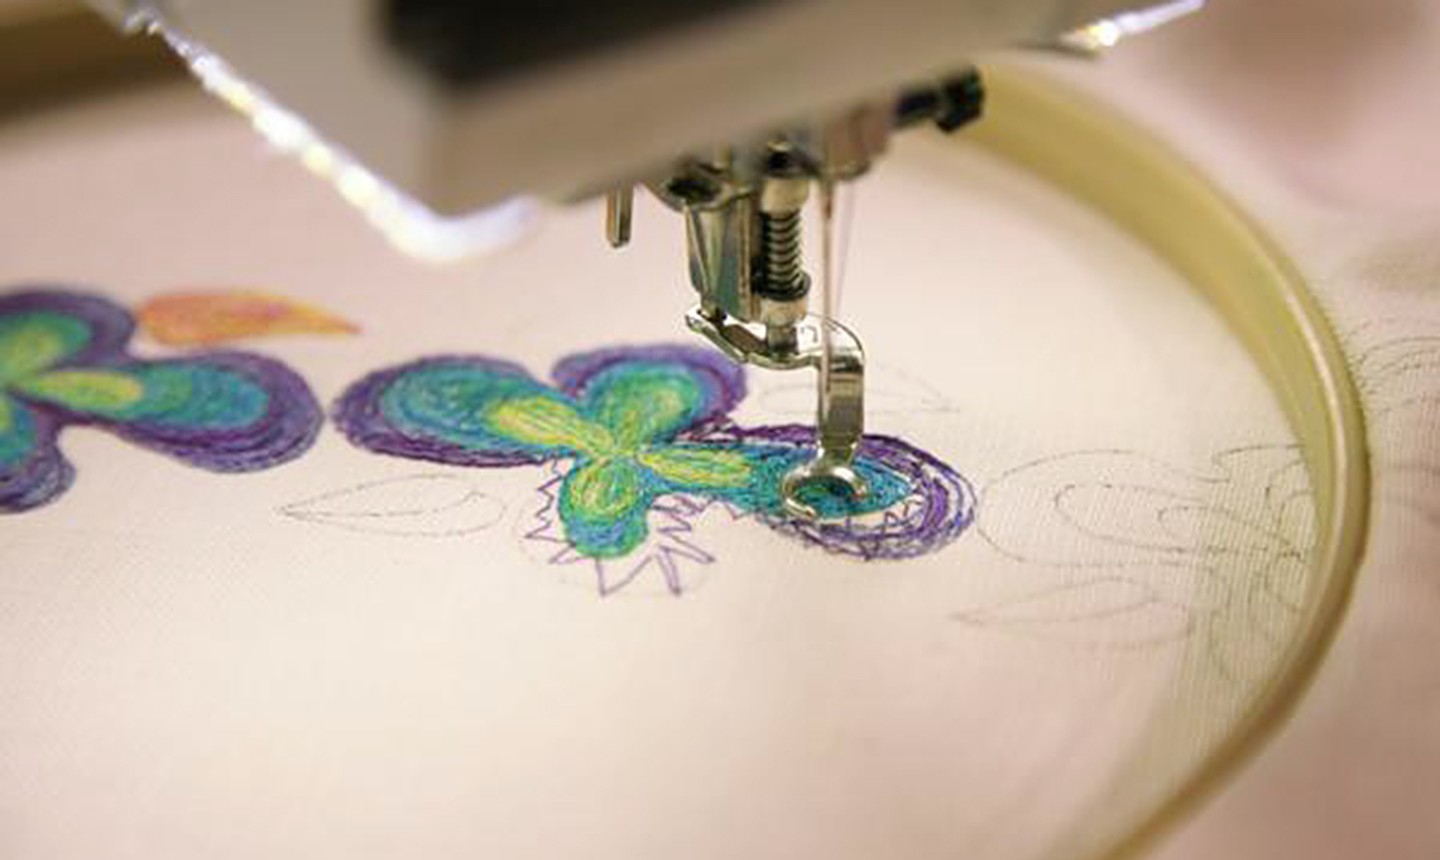 Embroidery Patterns For Sewing Machines How To Free Motion Machine Embroider